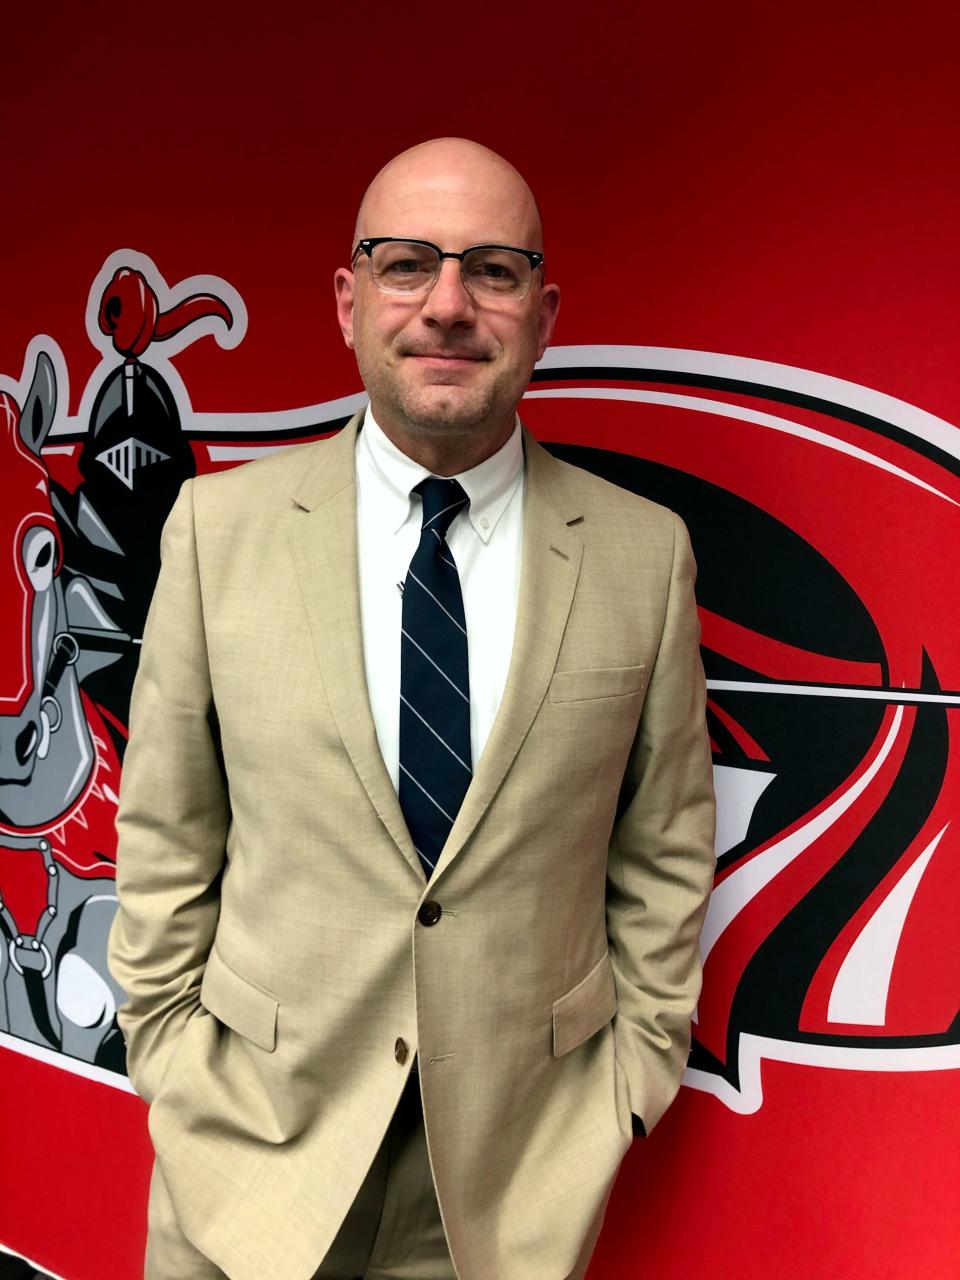 This is an April 14, 2021 contributed photo of current Fairview High School principal Matt Lane, who will be the new General McLane school superintendent beginning July 1, 2021.